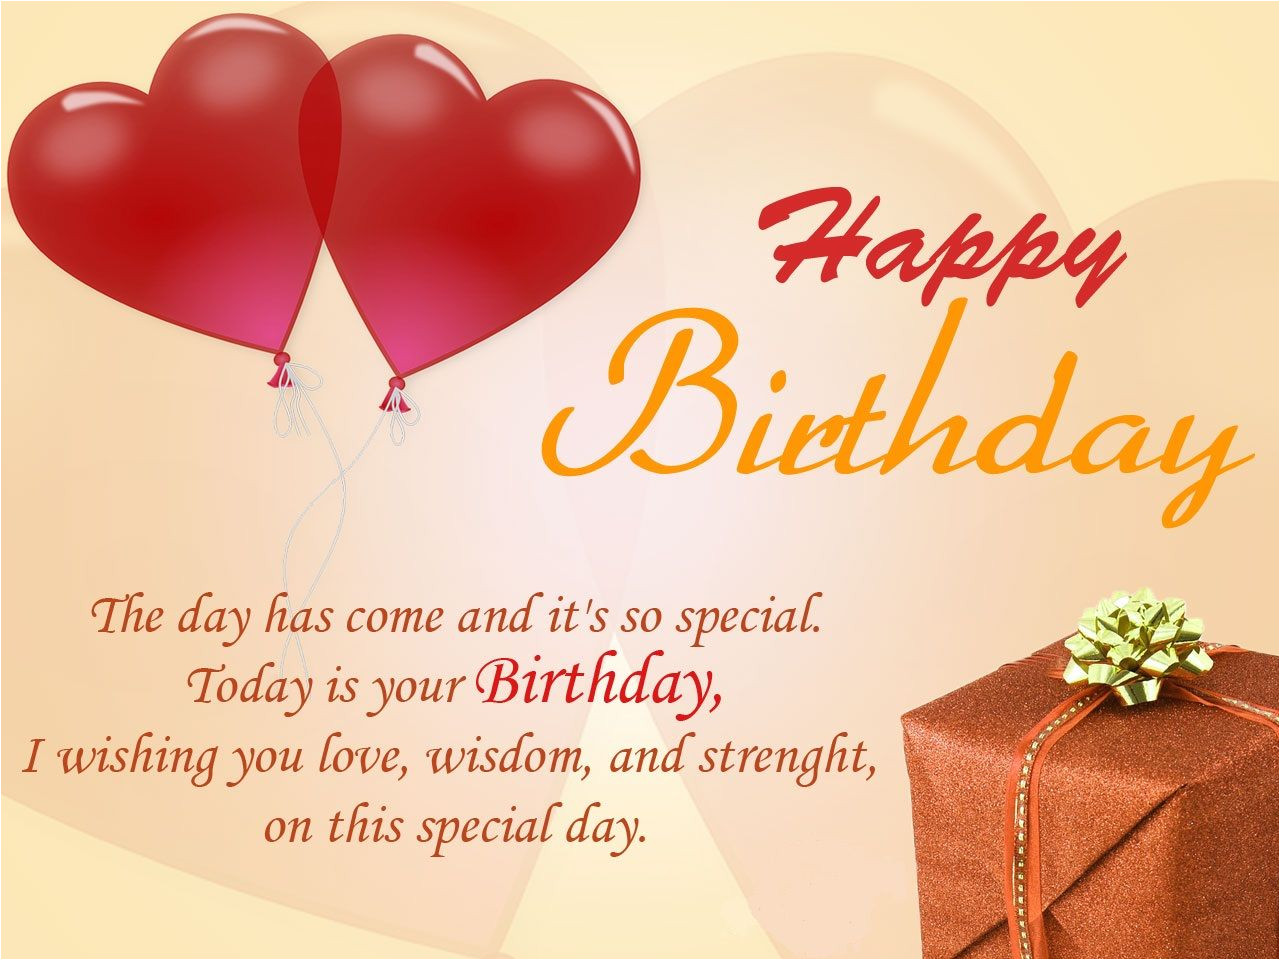 Card Verses for Husband Birthday 27 Images Happy Birthday Wishes Quotes for Husband and Best